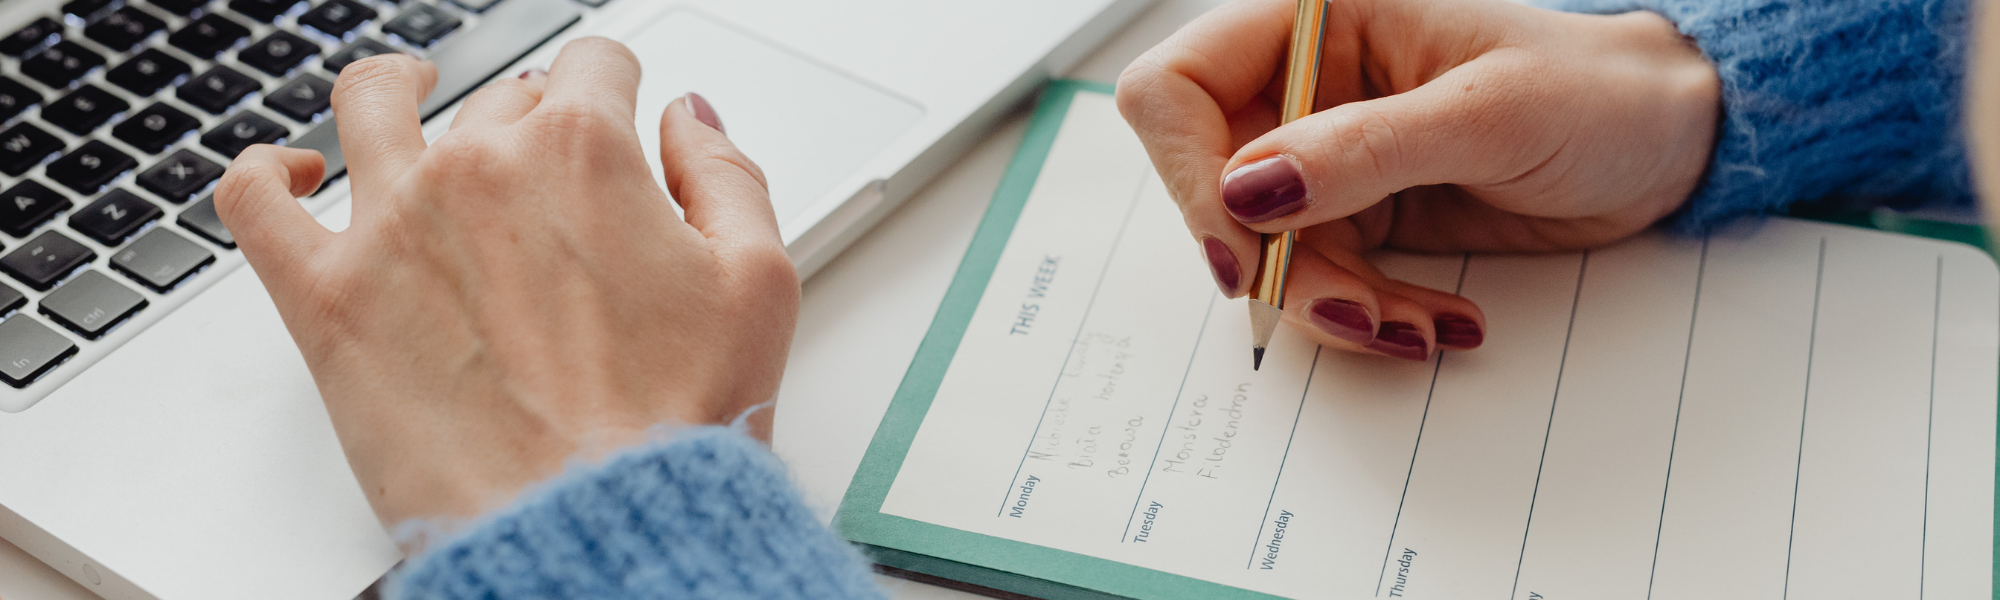 Image shows the arms of a lady wearing a light blue sweater, writing down her goals for the day.  Image courtesy of Canva